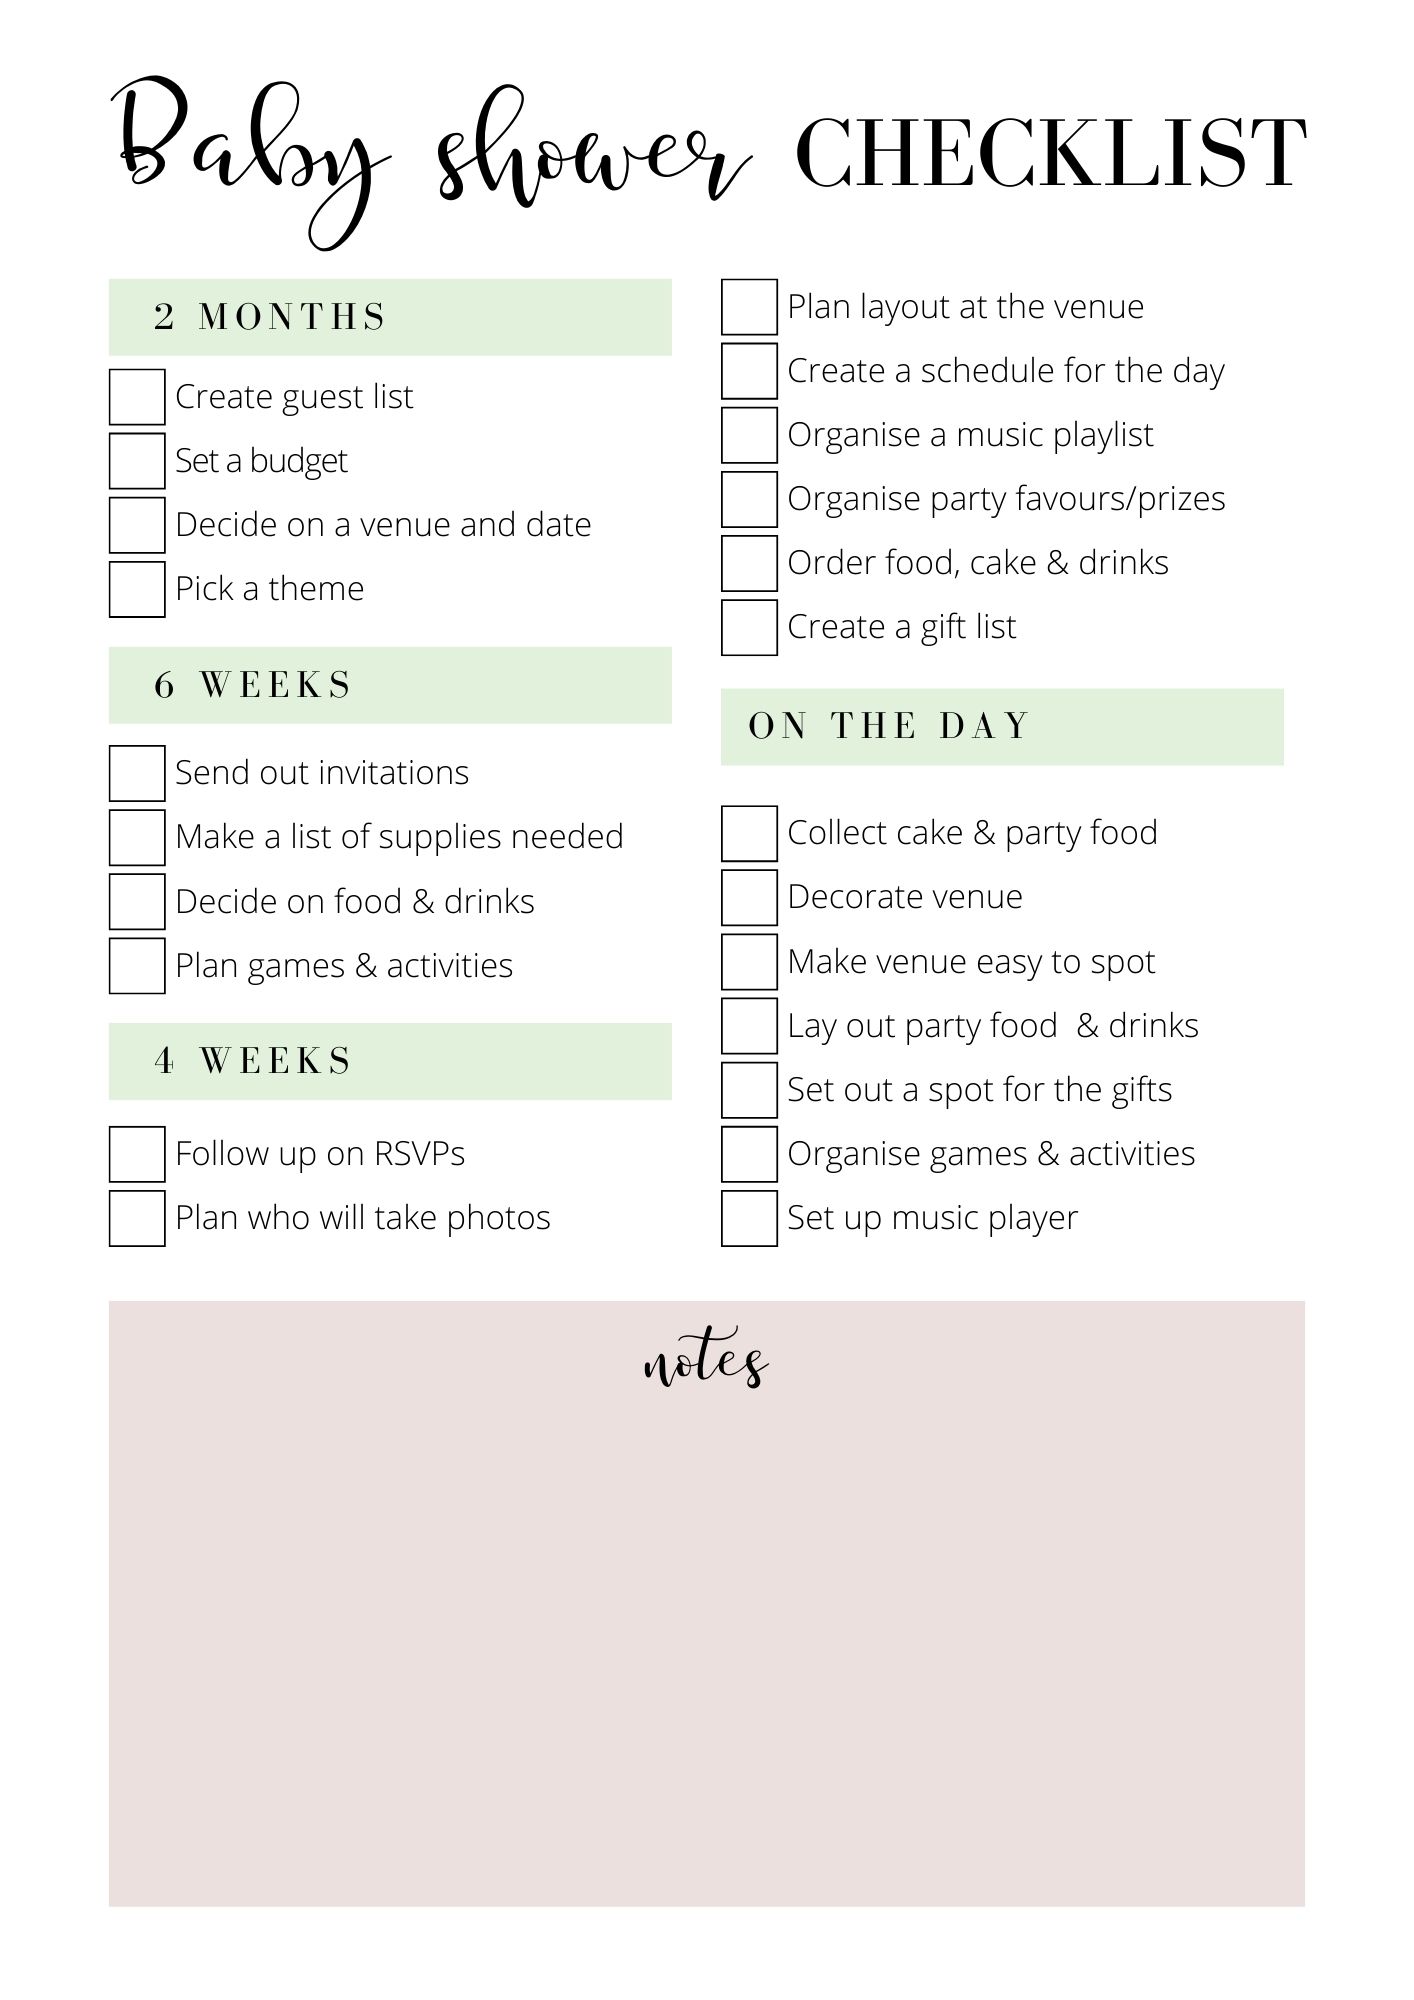 How To Plan A Baby Shower   Free Printable Checklist The Mummy Bubble